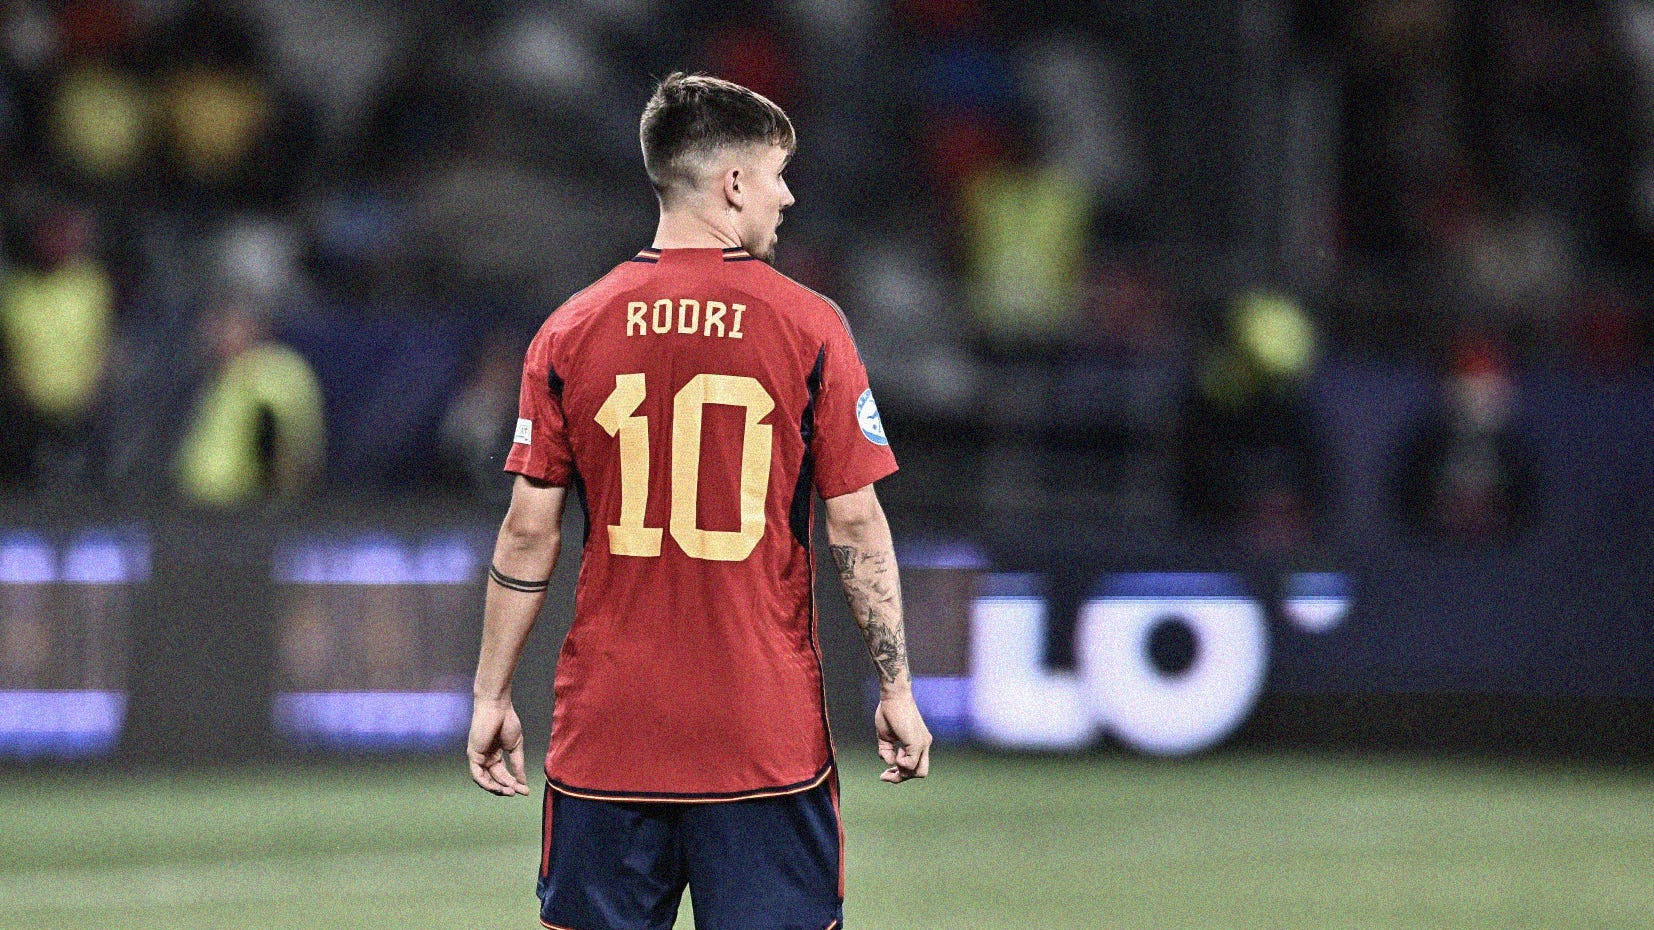 A wide-frame photo of Spain's Rodri Sánchez from behind, focussing on the 'Rodri 10' decals on his shirt